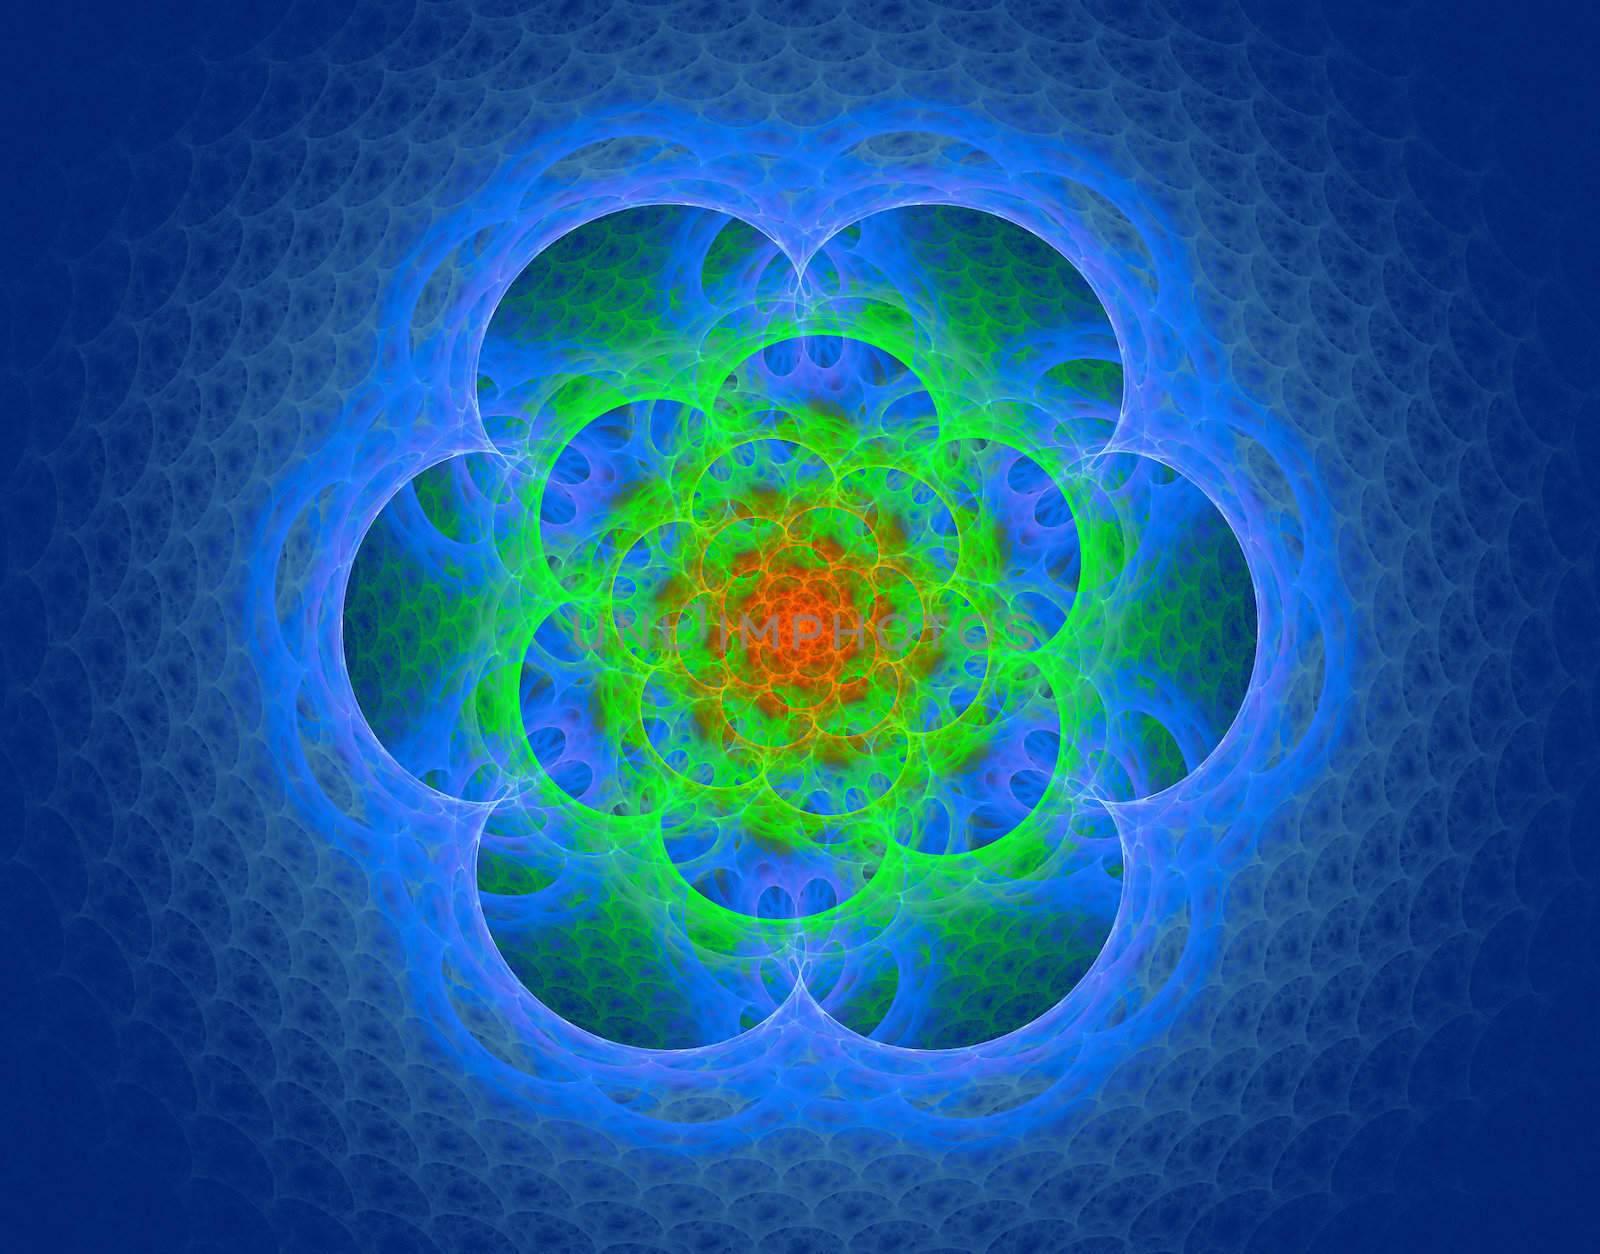 The symmetric and original image as a flower generated by the computer program. I store at myself in archive an initial file with the alpha - channel.
